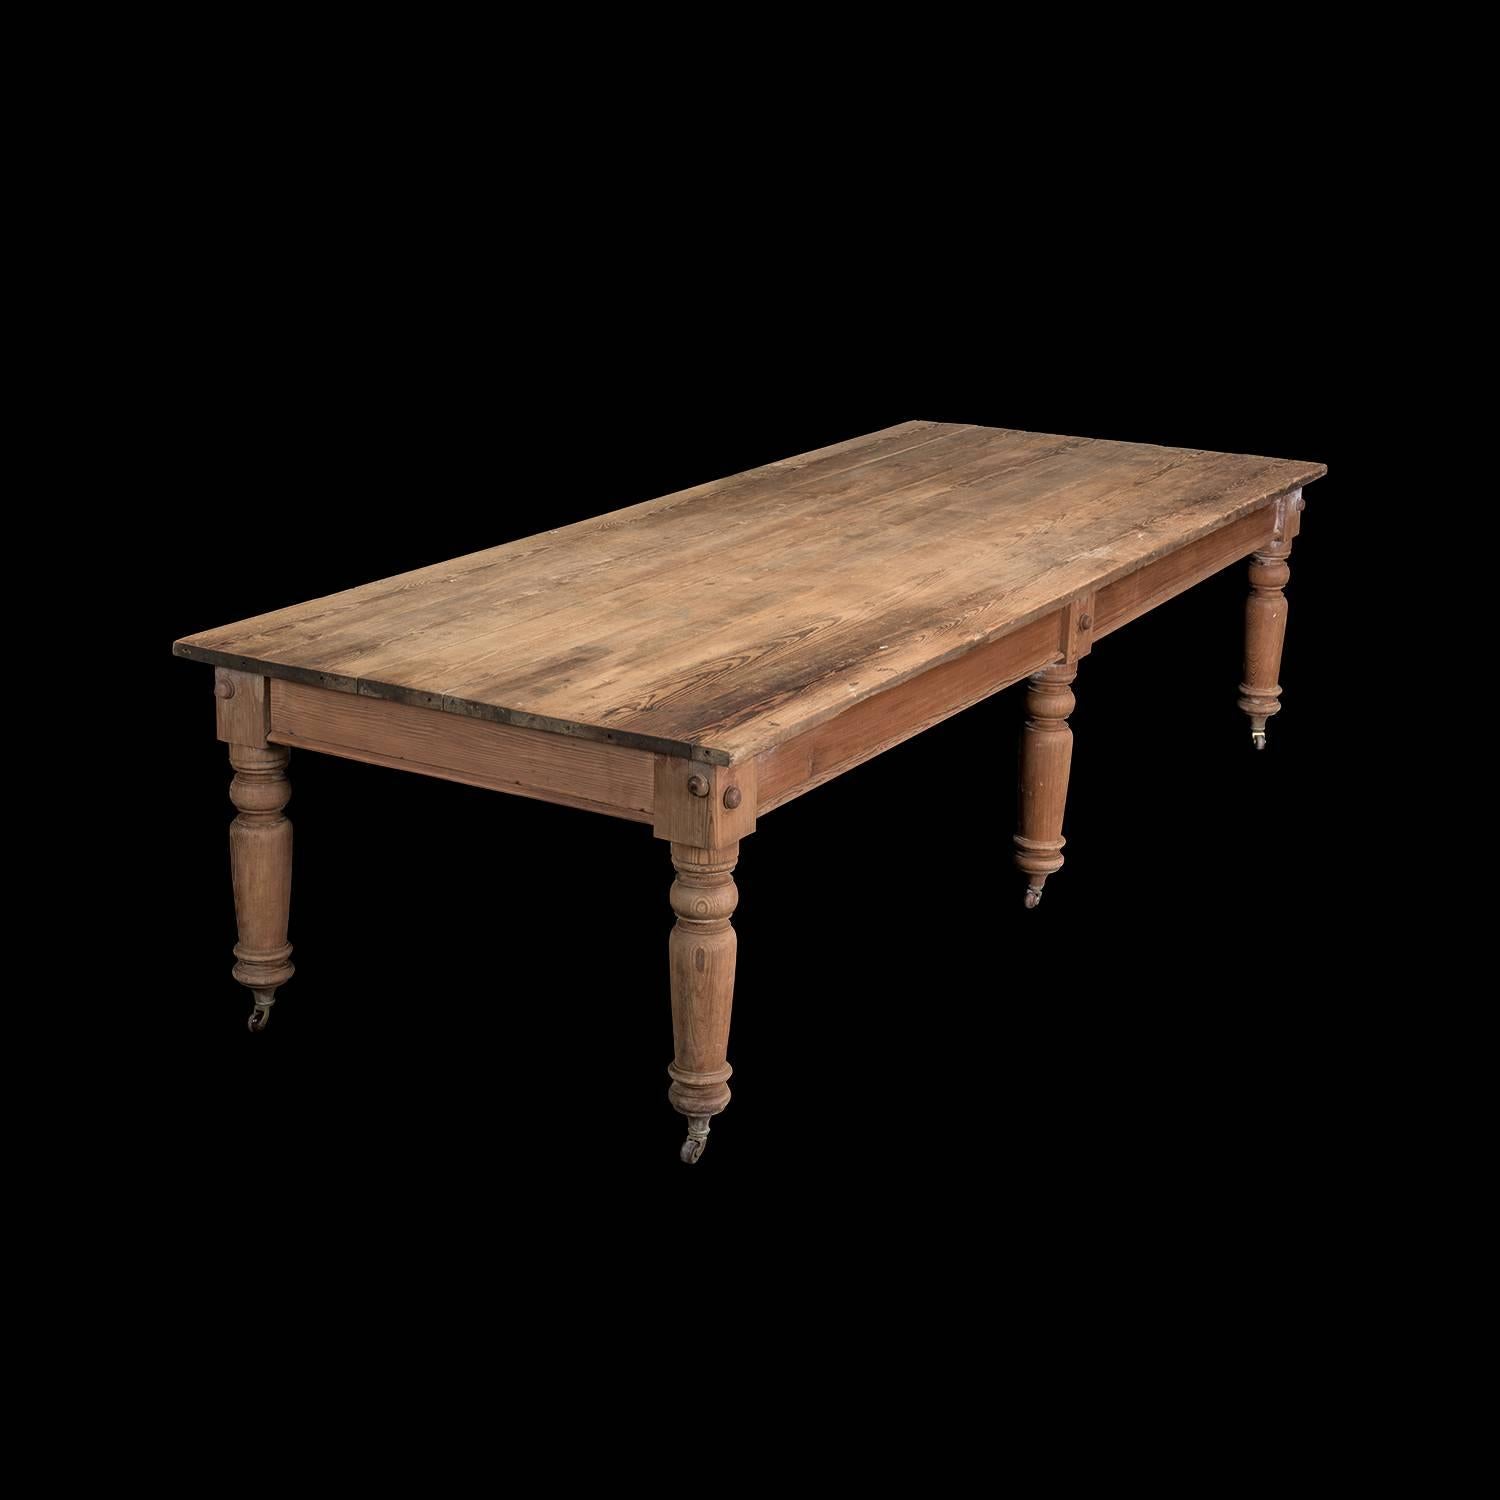 An extremely large mid-19th century scrubbed pine six-legged table, standing on castors (three original, three later) with plenty of leg room, worn and well weathered.